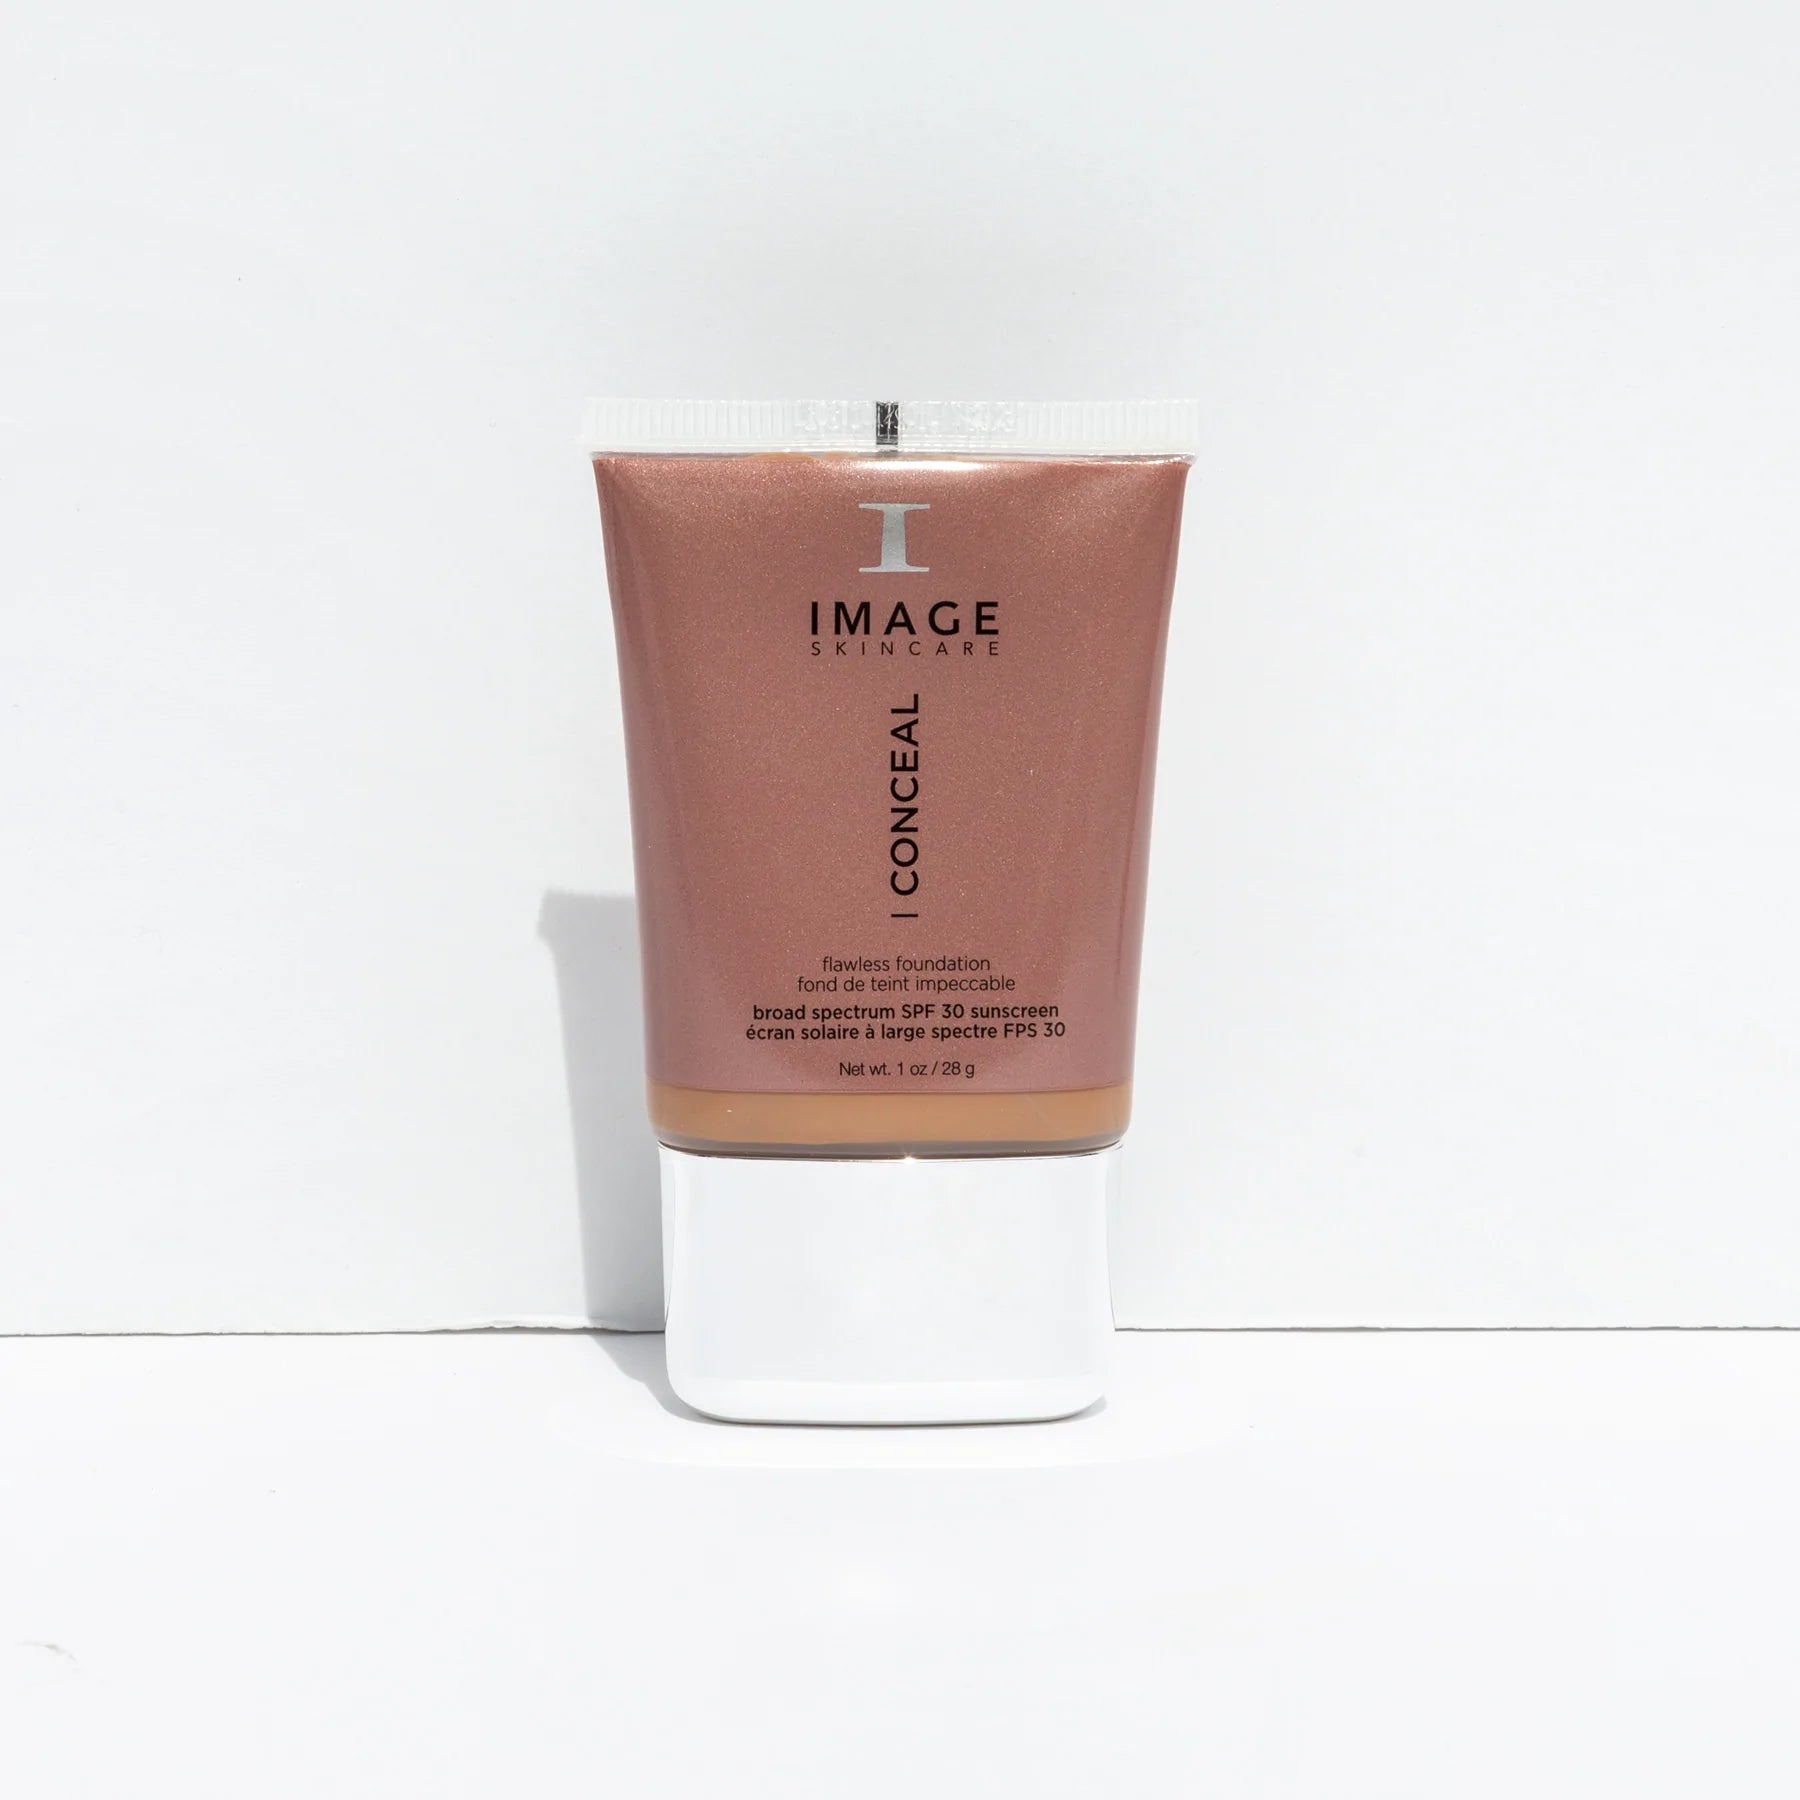 I CONCEAL flawless foundation broad-spectrum SPF 30 deep honey